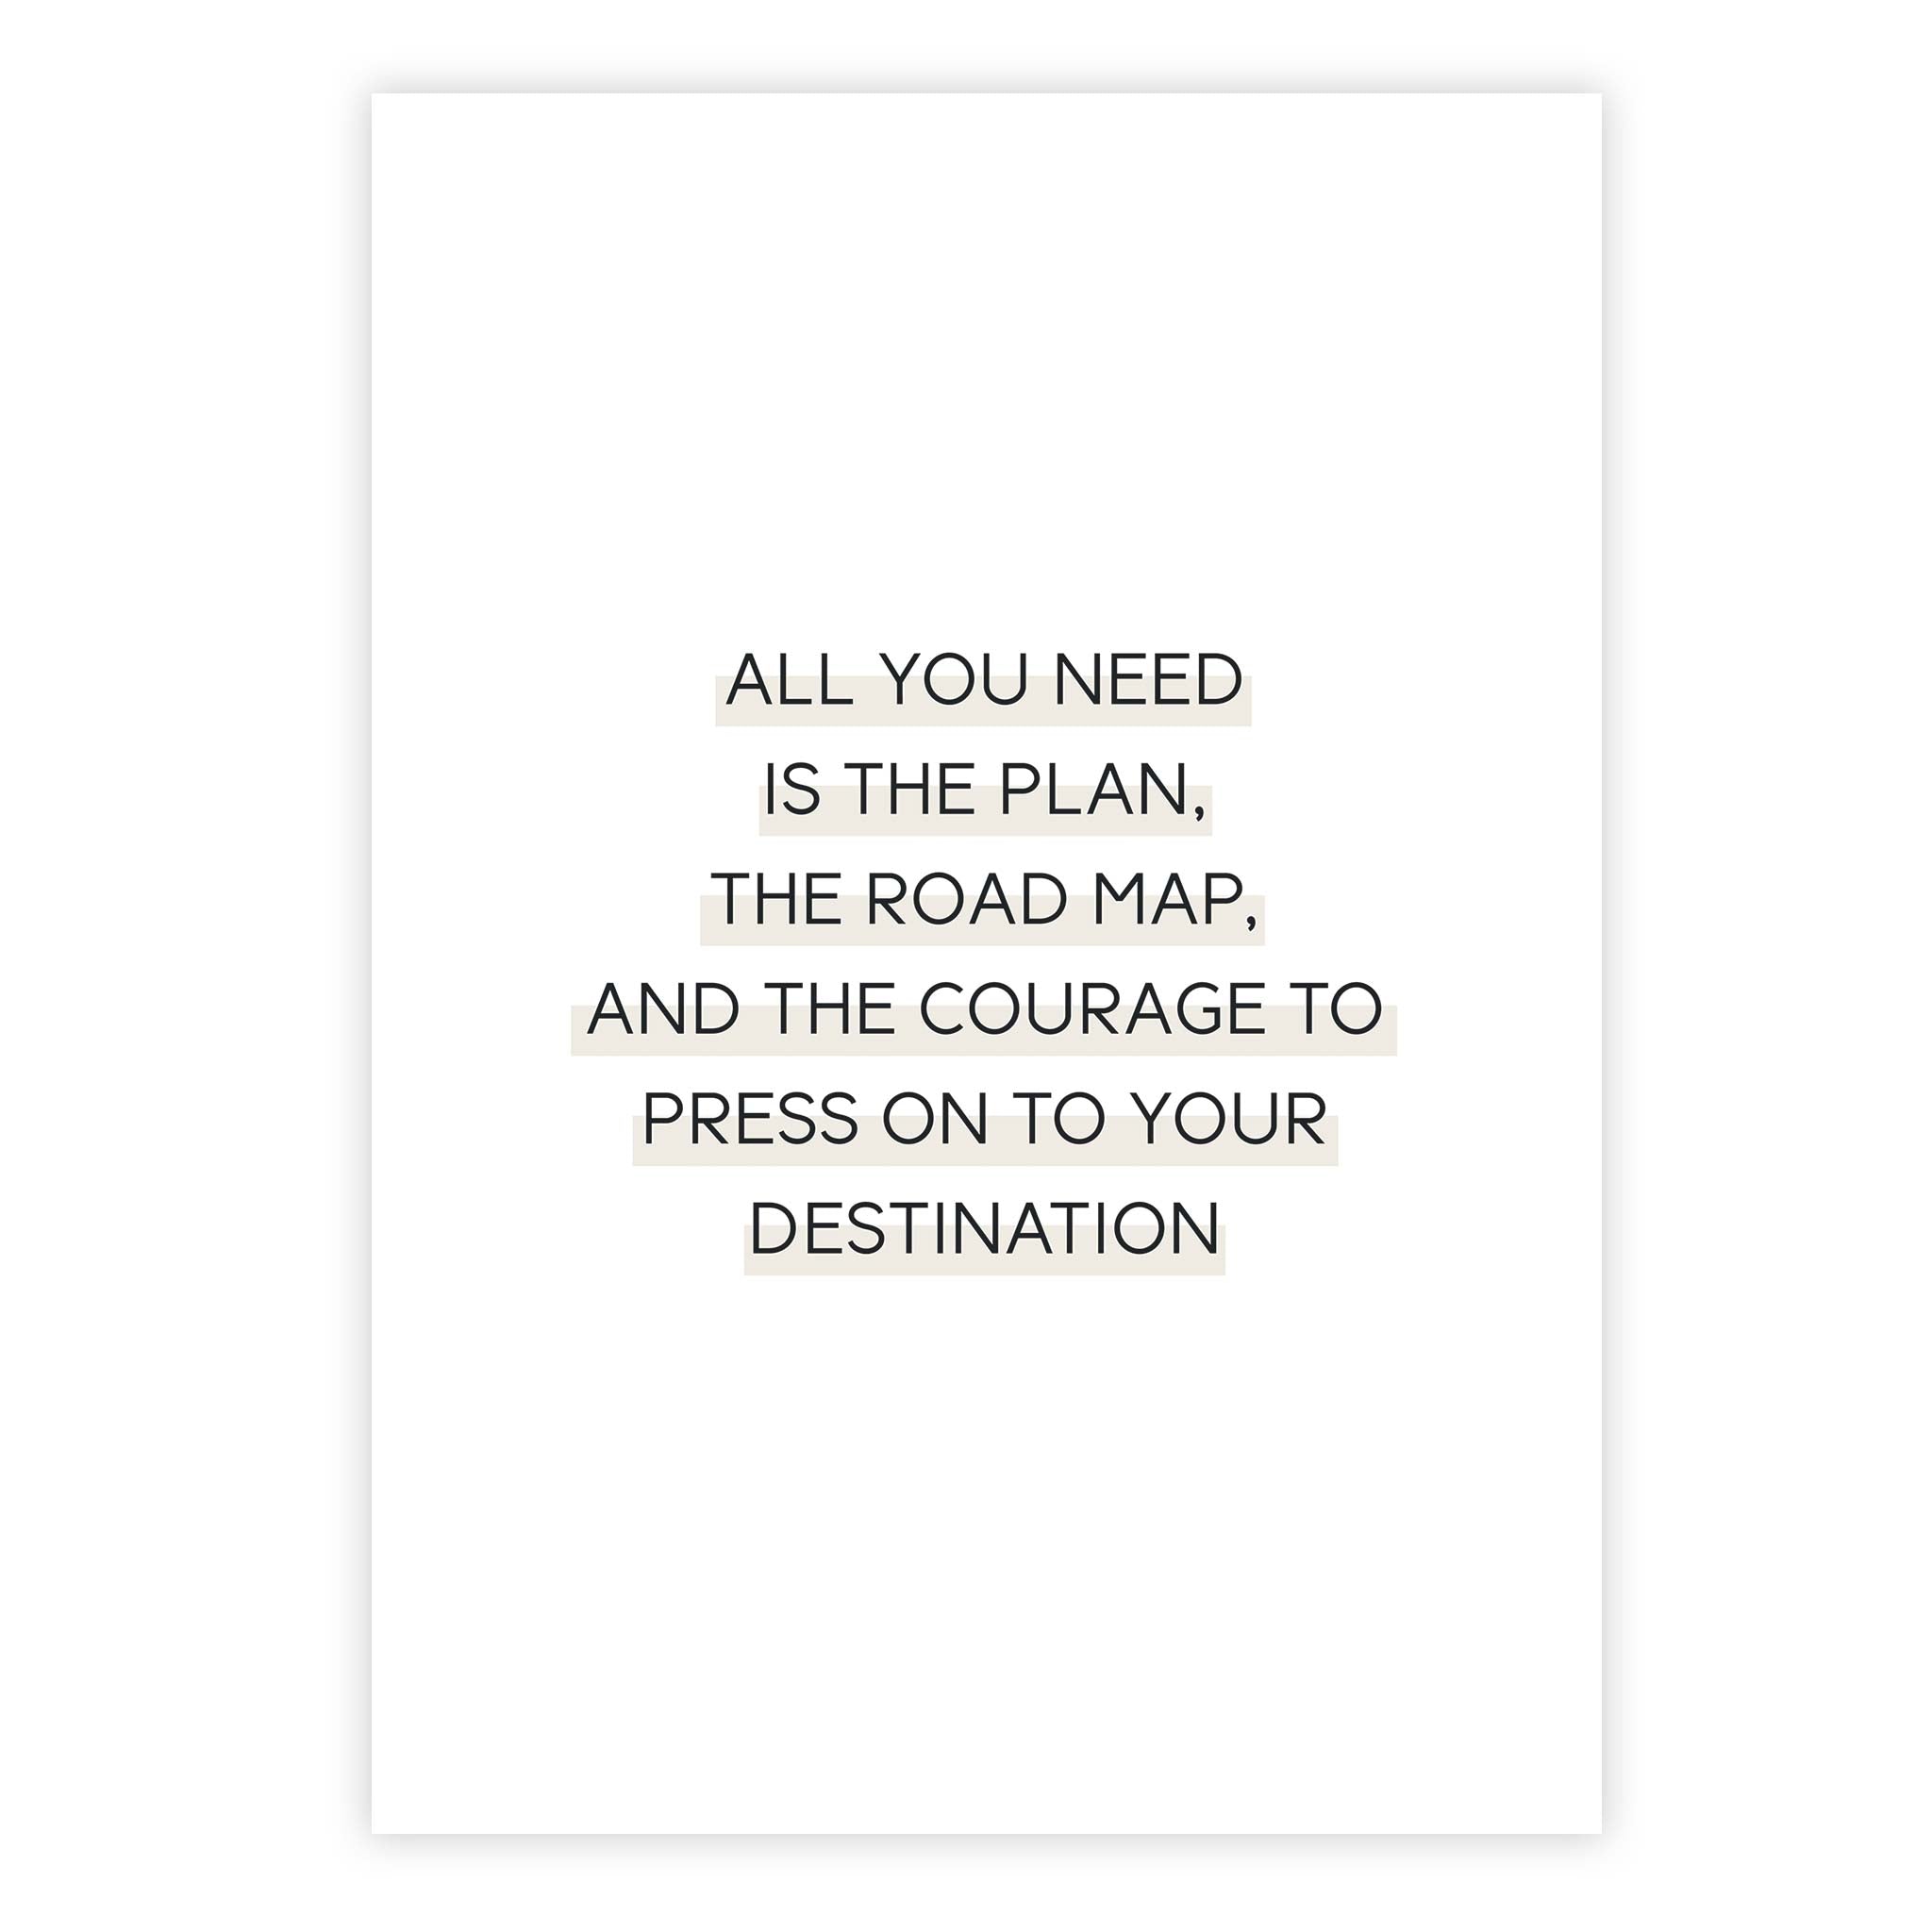 All you need is the plan, the road map, and the courage to press on to your destination